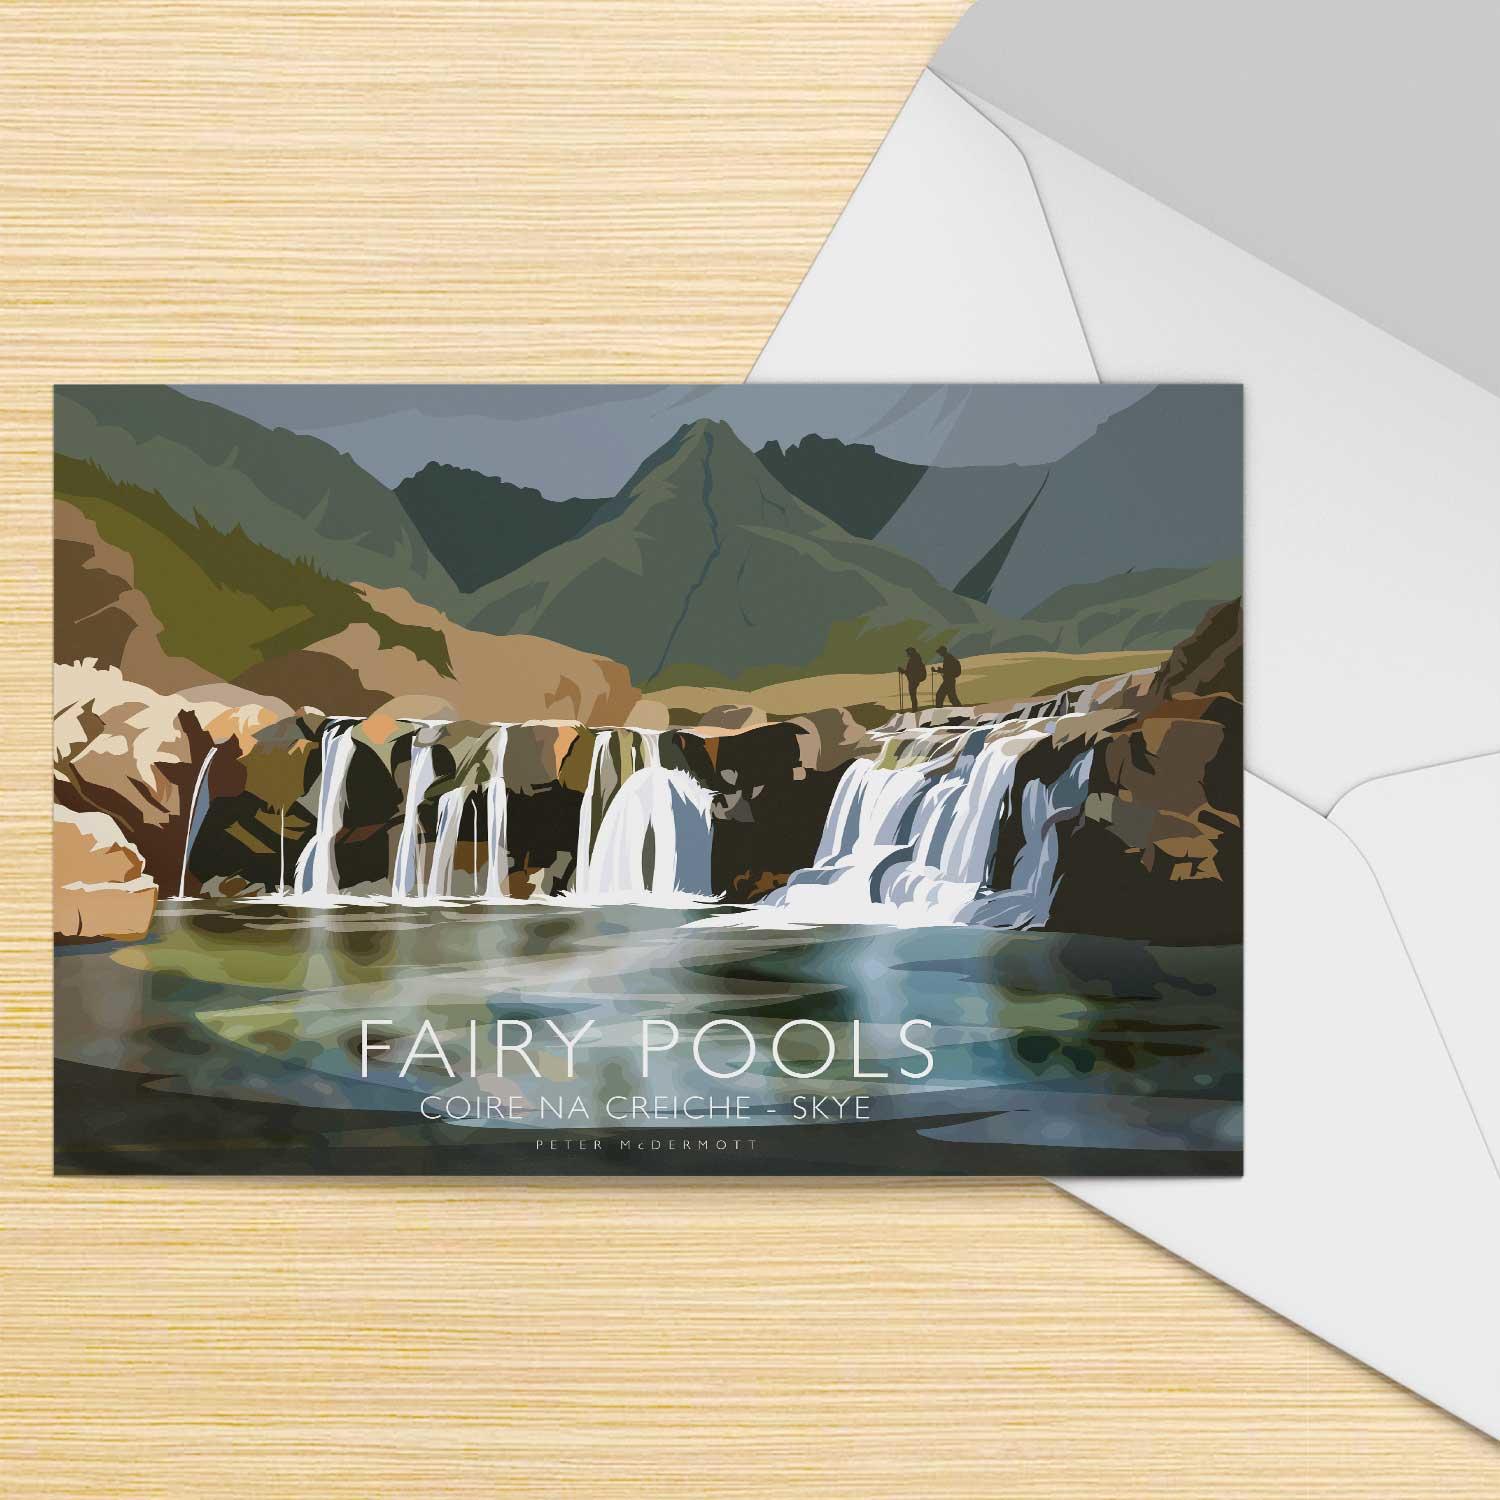 Fairy Pools, Coire Na Creiche, Skye Greeting Card from an original painting by artist Peter McDermott